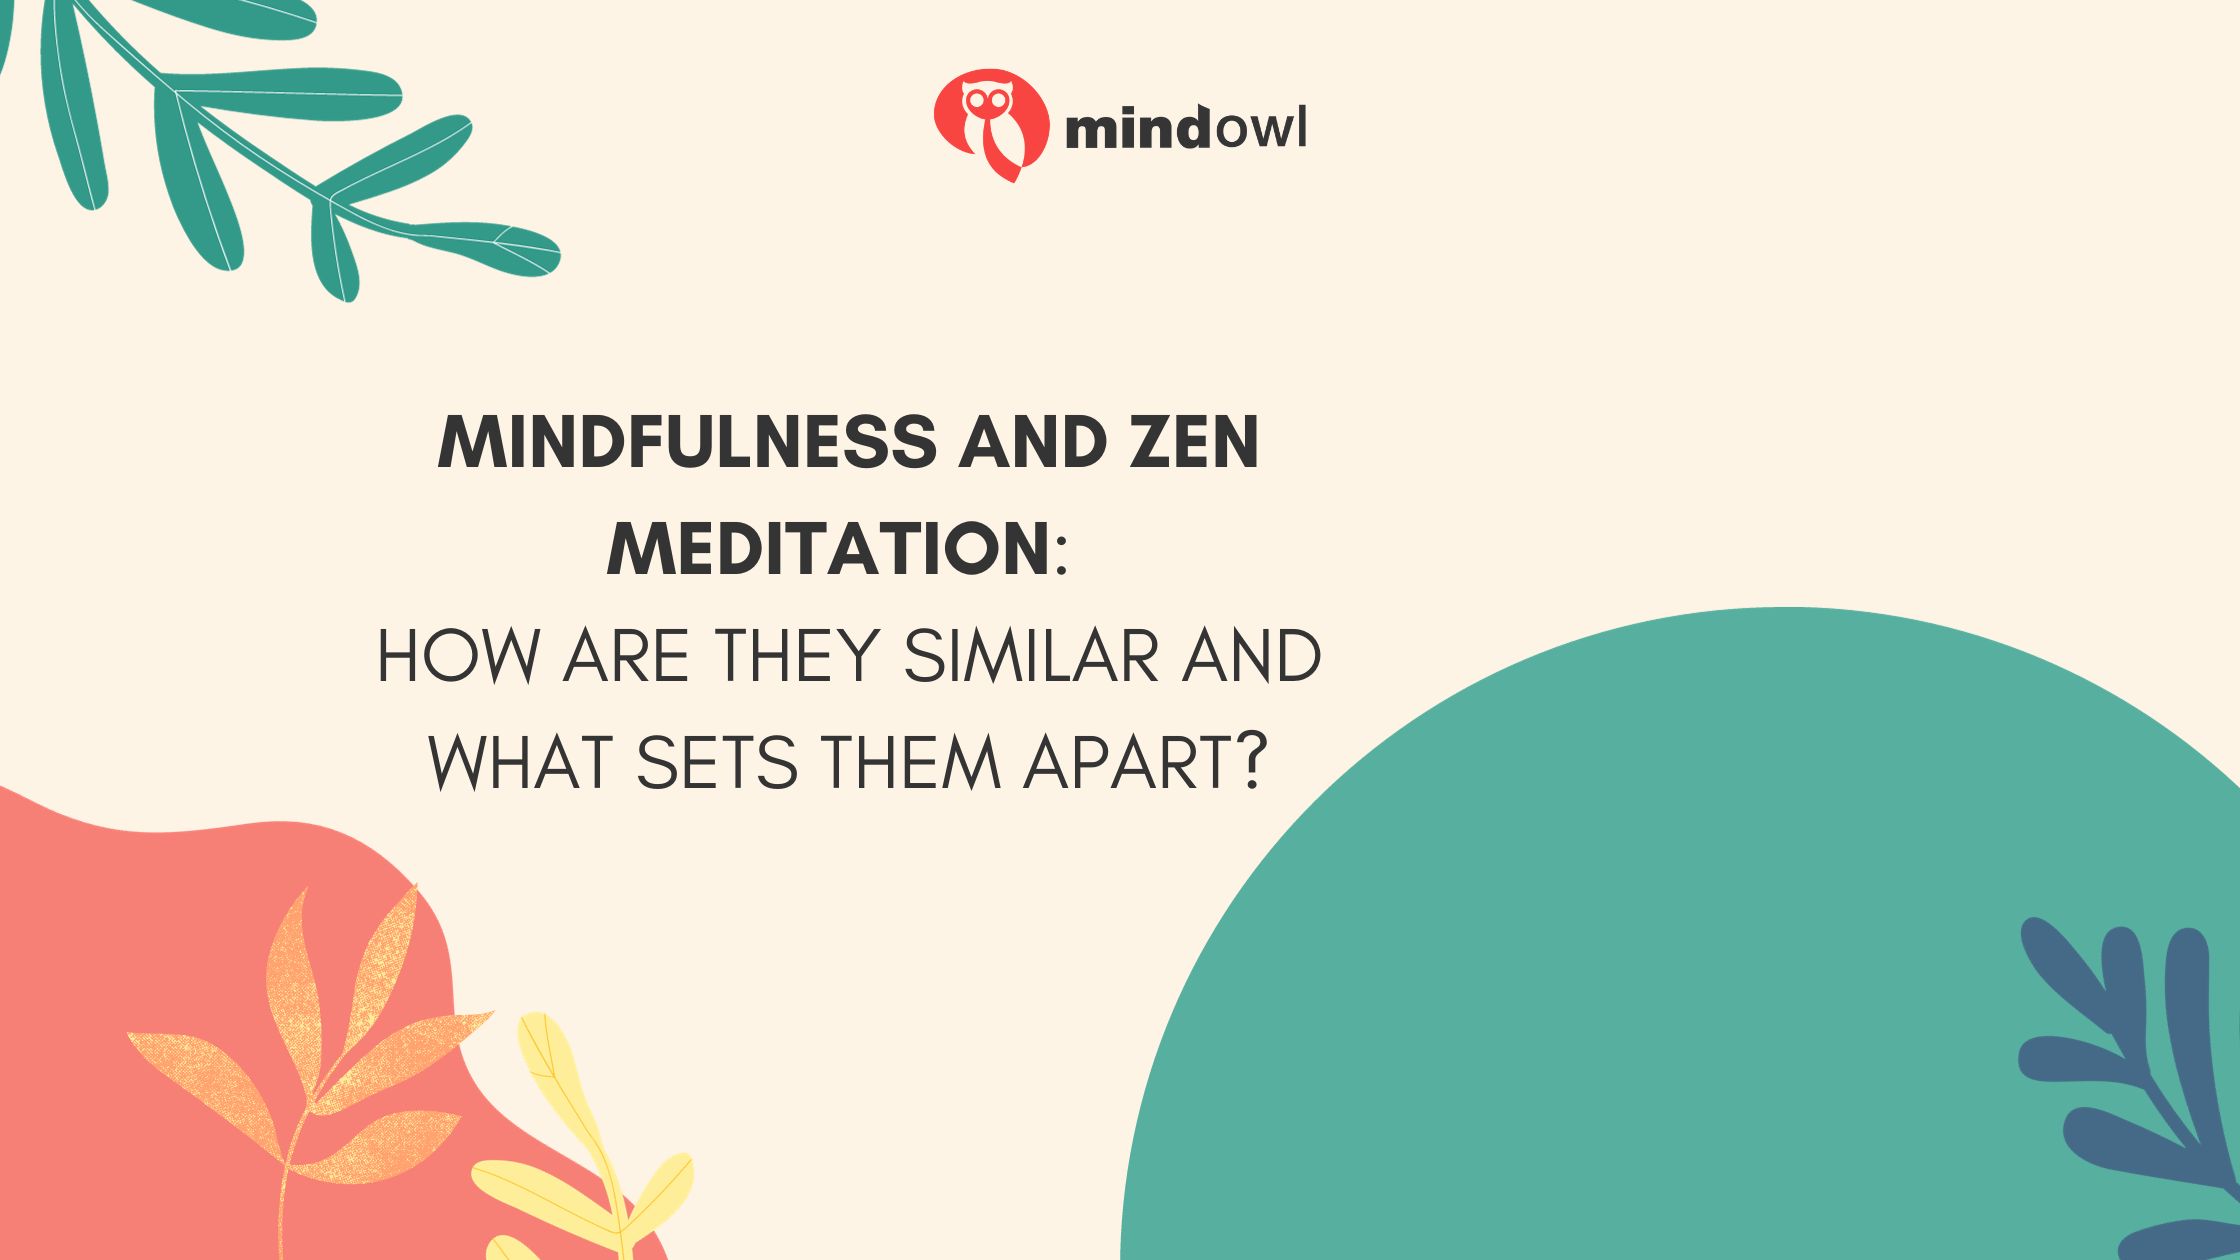 Mindfulness and Zen Meditation: How Are They Similar and What Sets Them Apart?